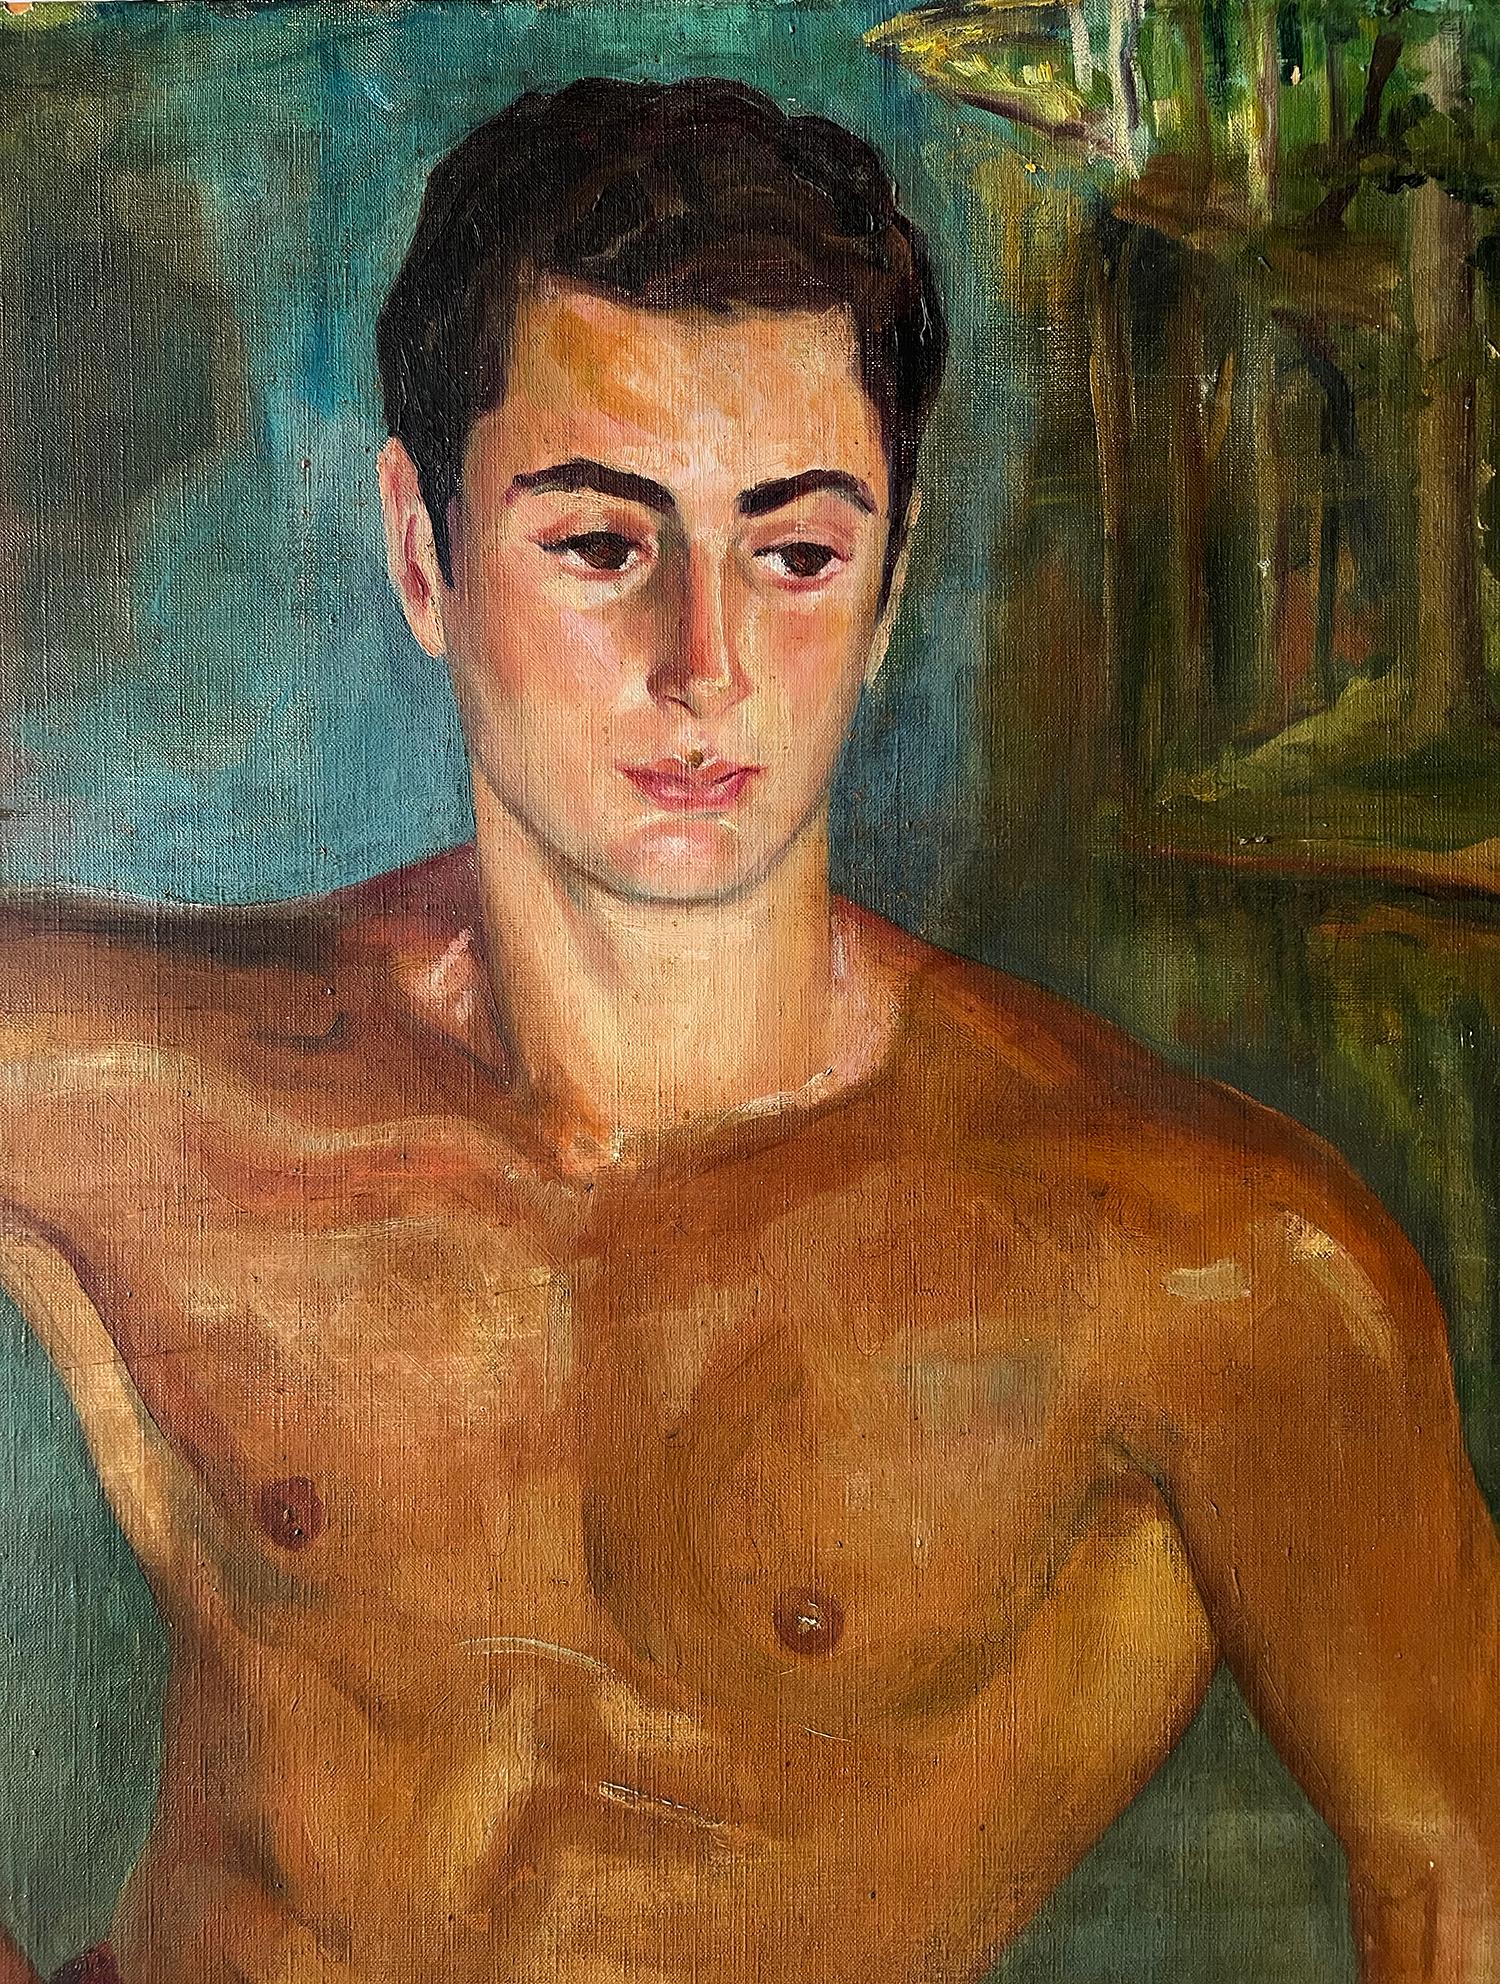 Nude Man In Bathing Suit,  Male Nude in Speedo, Gay art,  Sex appeal - Painting by Louise Schacht